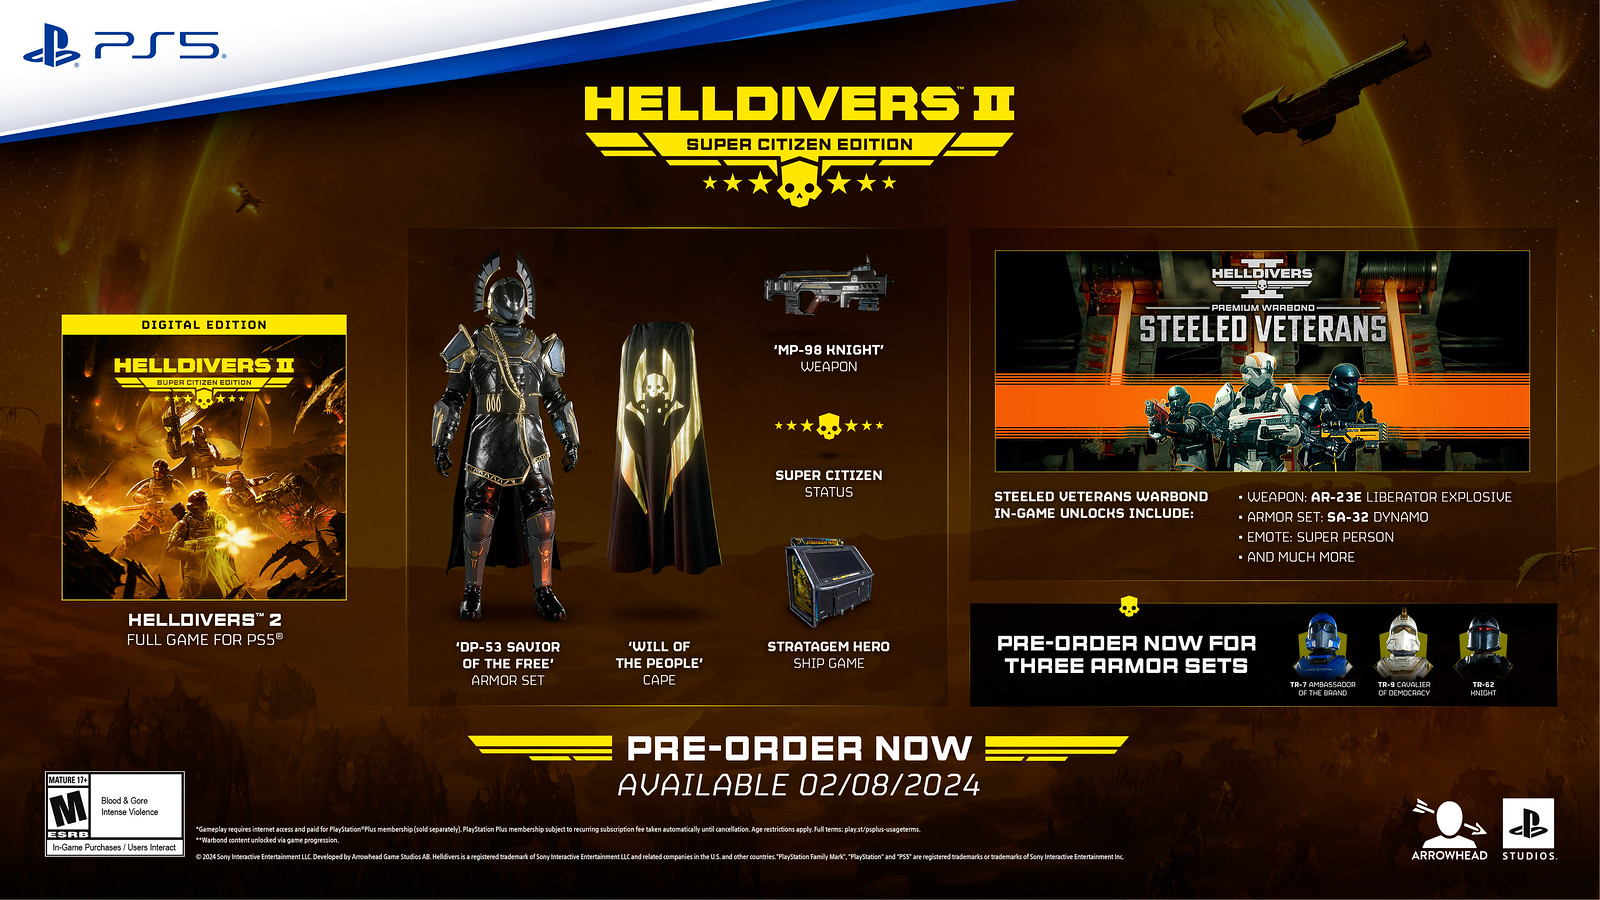 Helldivers 2 когда вышла. Helldivers 2 super Citizen Edition. Helldivers 2 ps5. Helldivers 1. Helldivers мех.